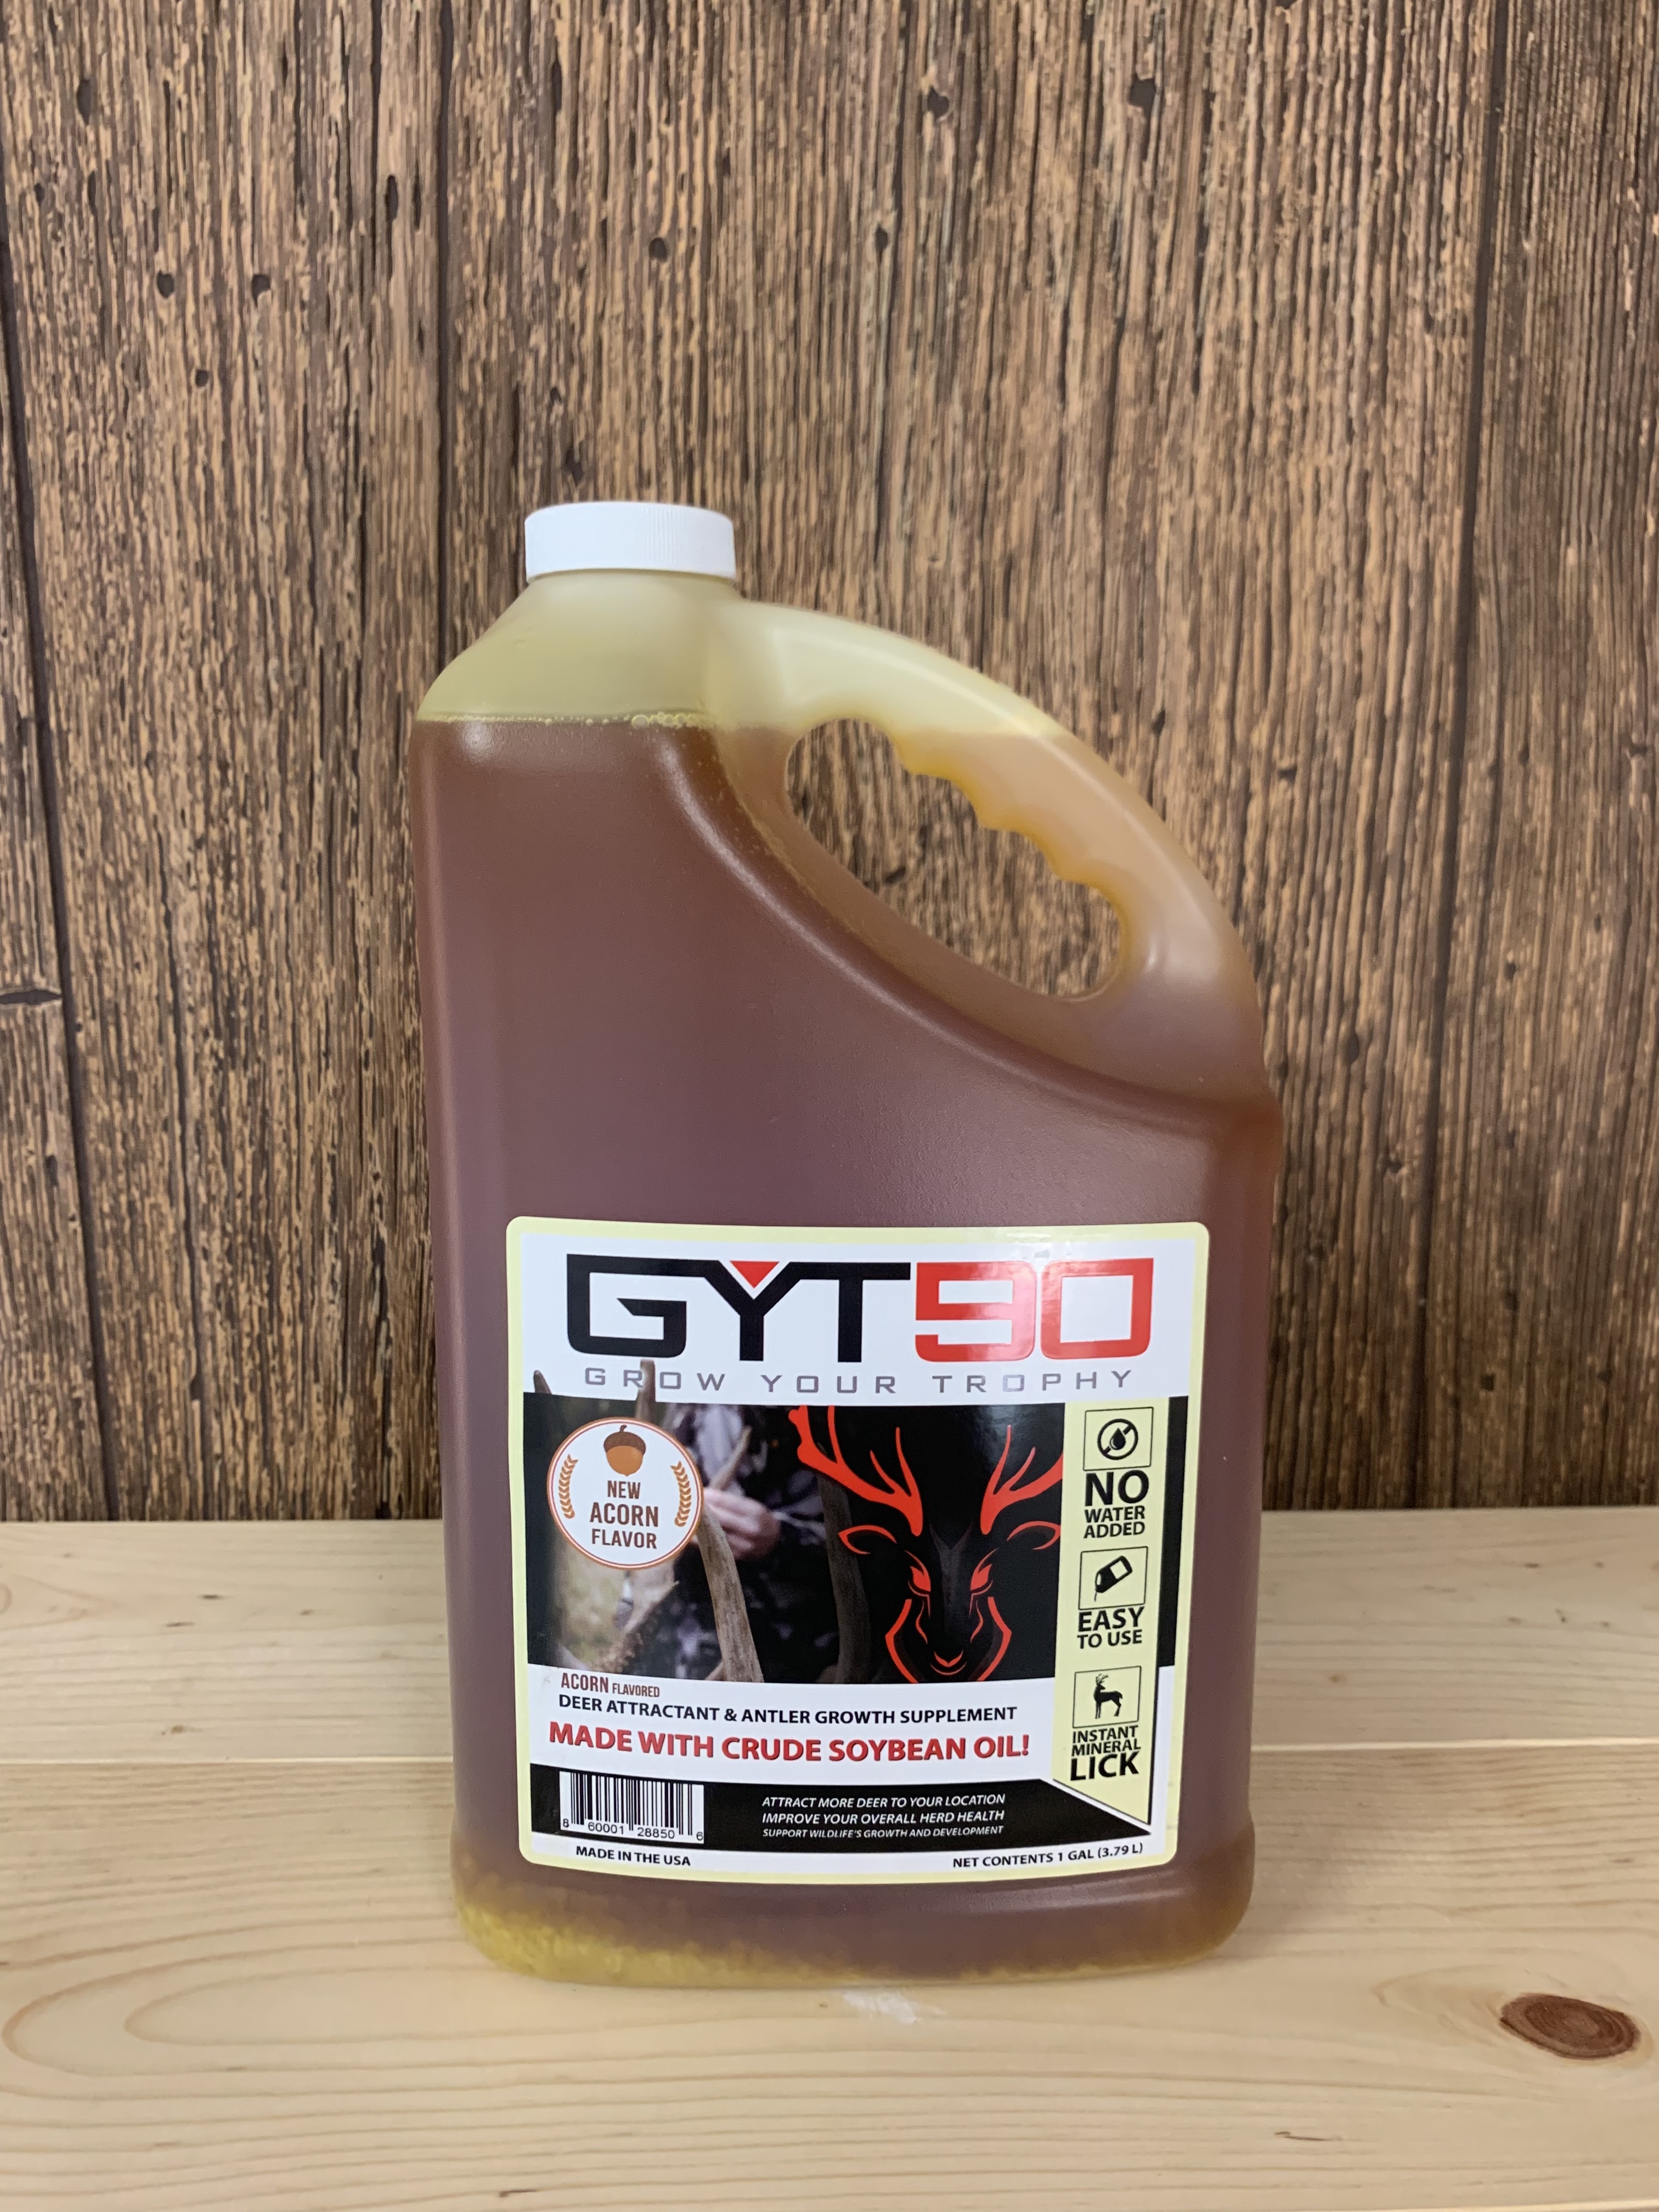 GYT90 1 Gallon Deer Attractant and Antler Growth Supplement Acorn GYT90 photo pic